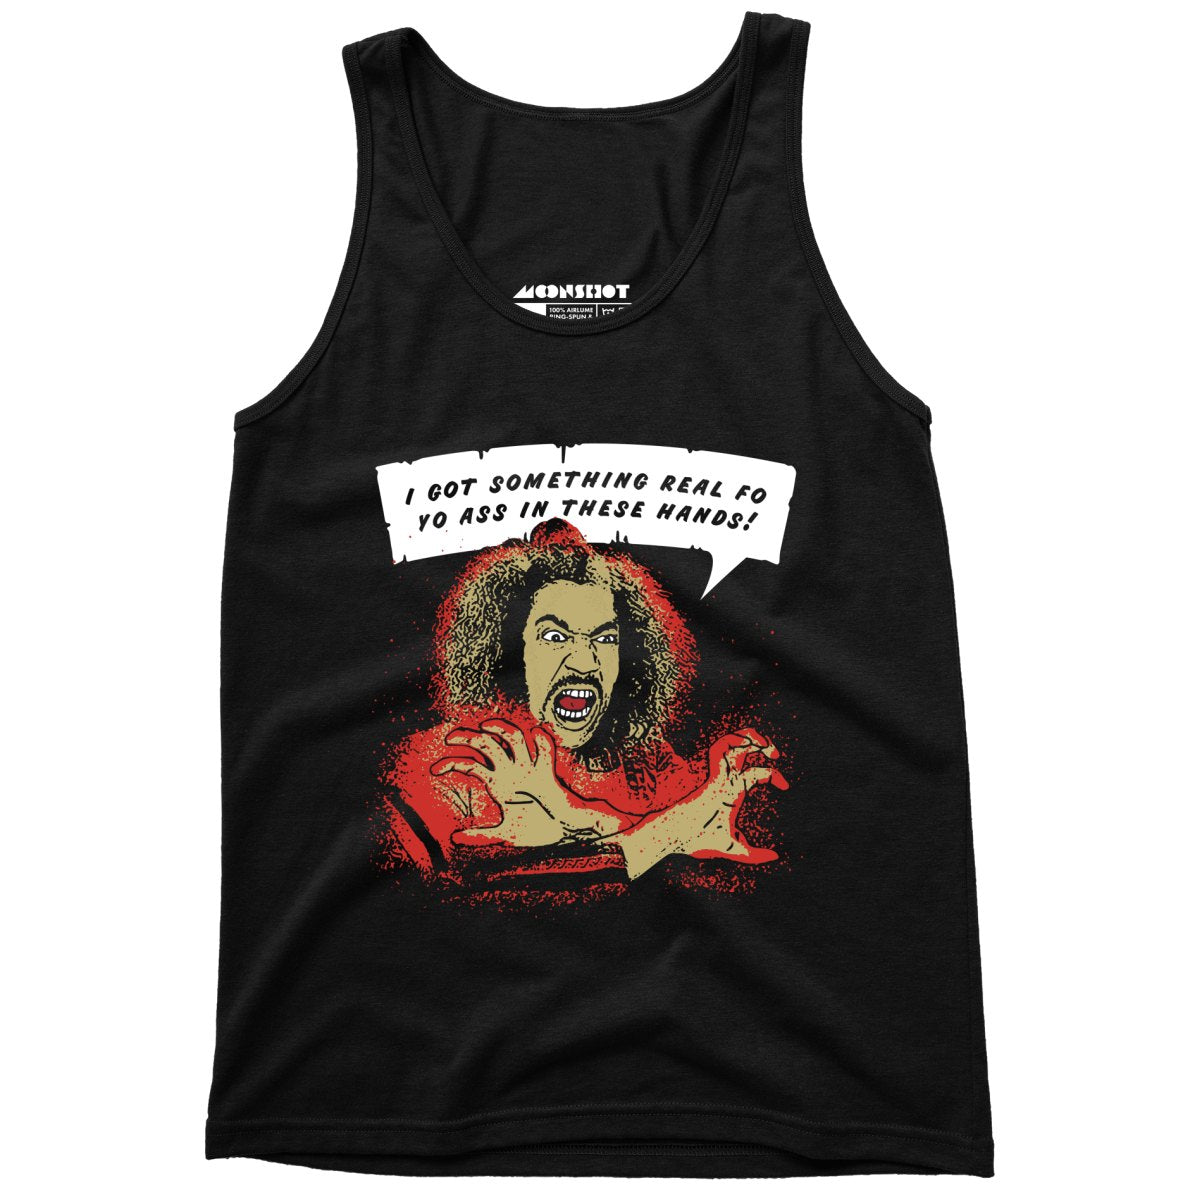 Shonuff - I Got Something Real Fo Yo Ass in These Hands - Unisex Tank Top